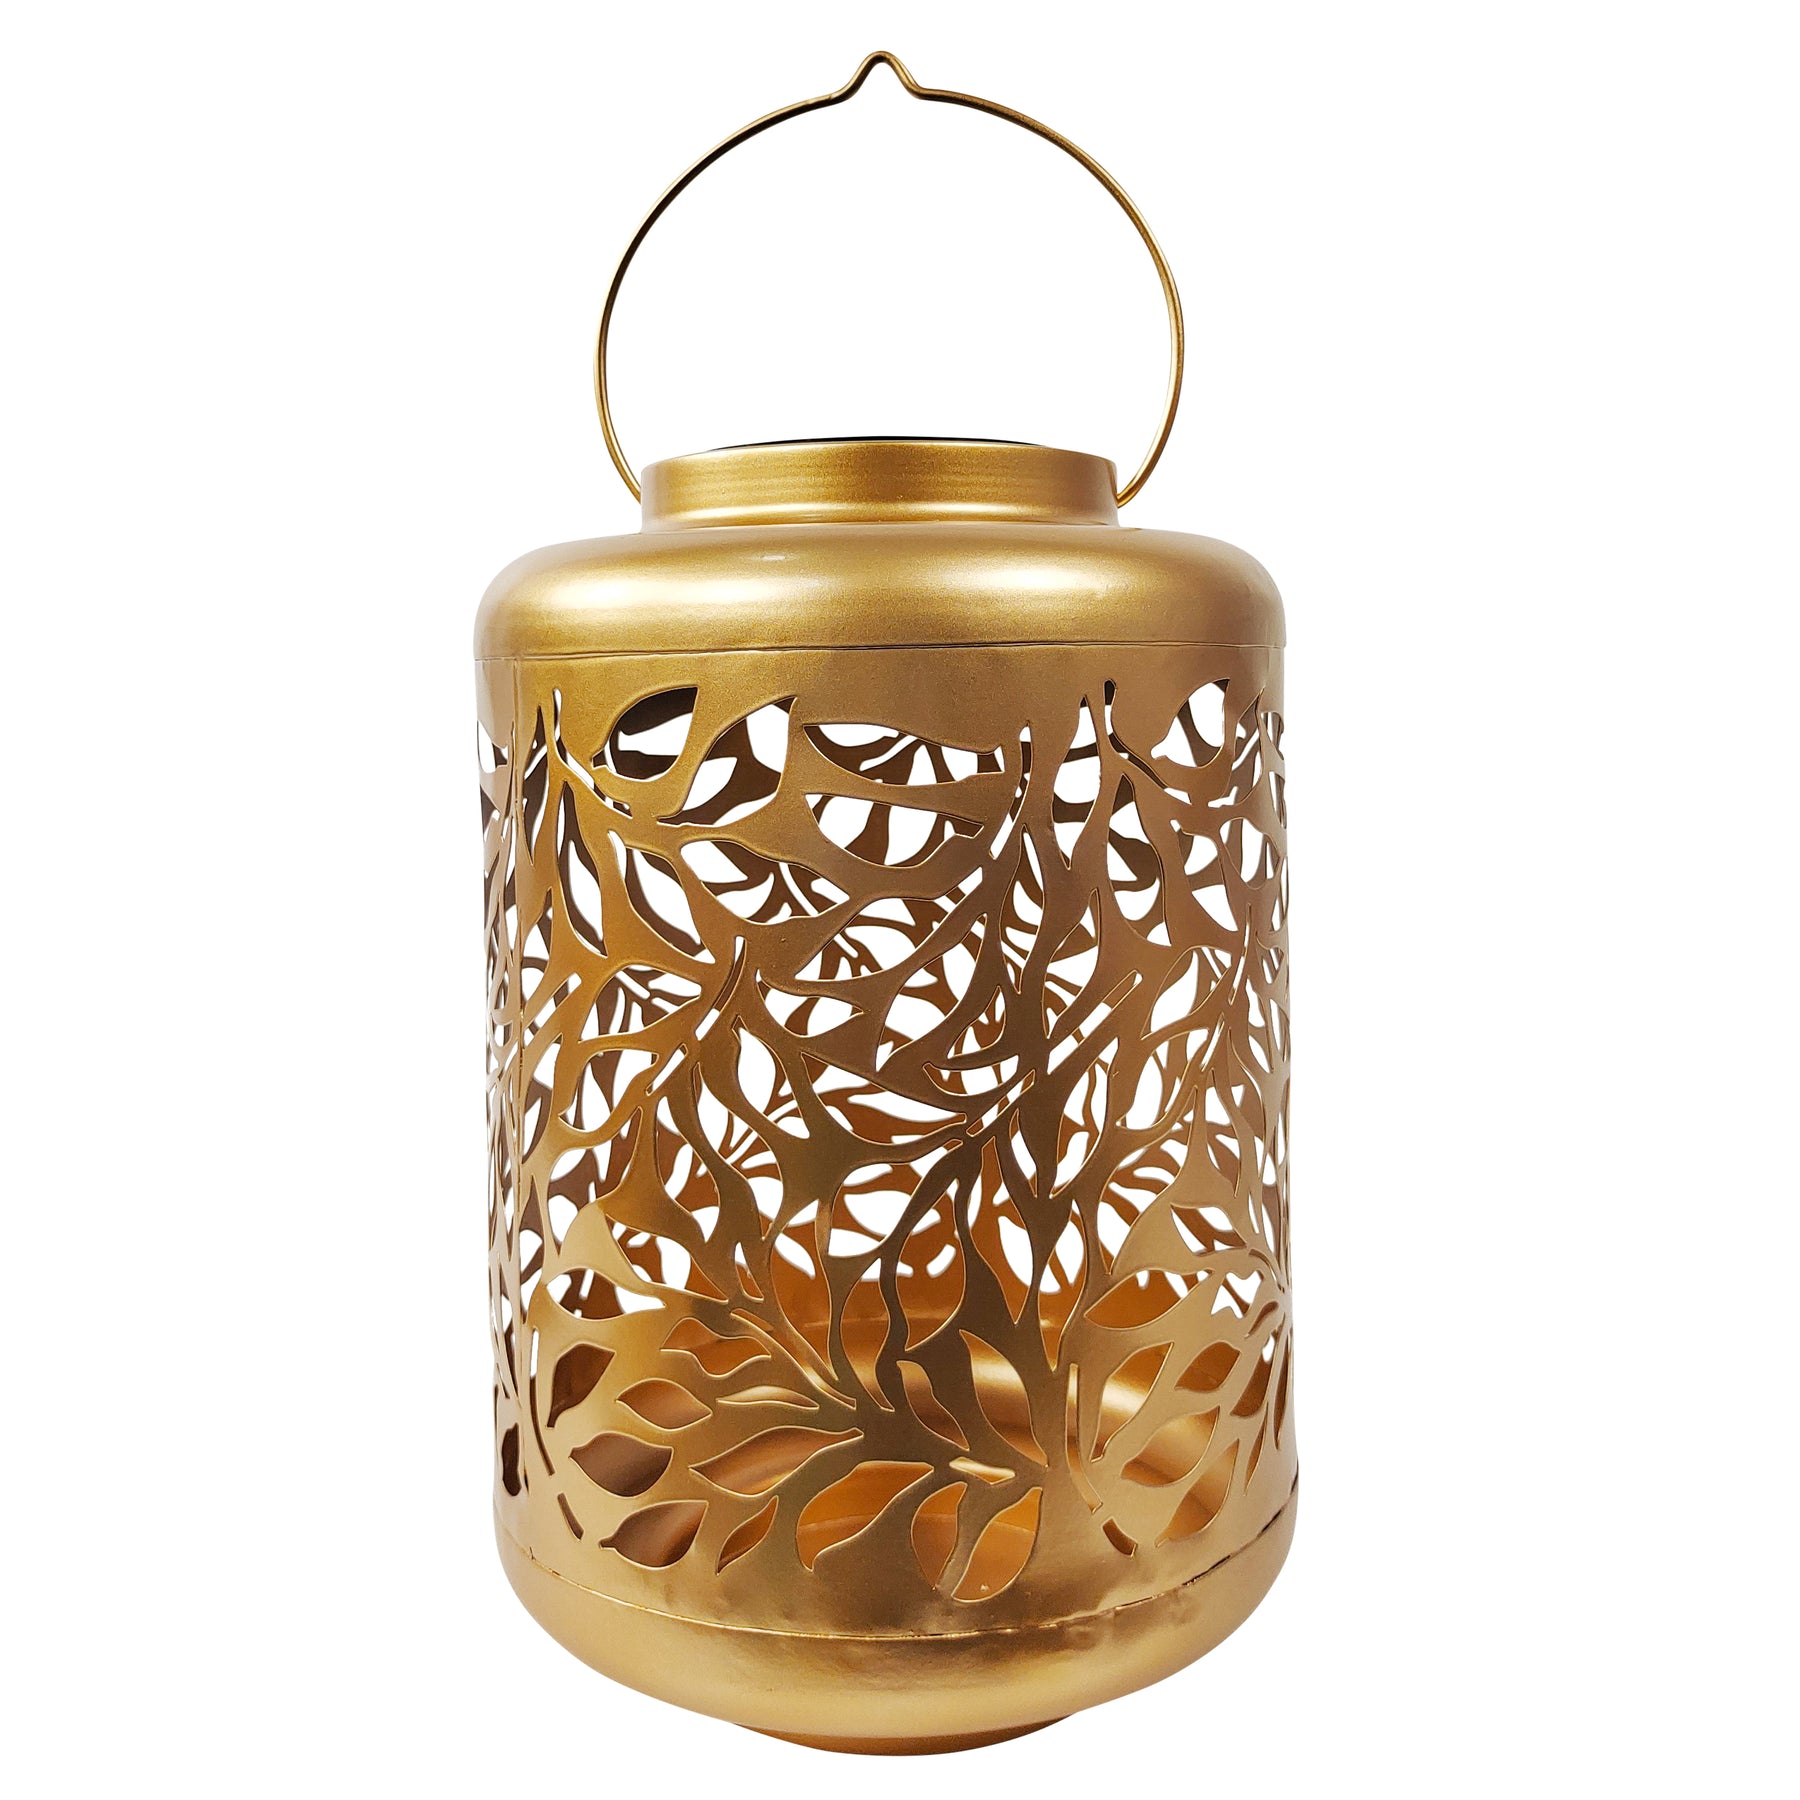 Bliss Outdoors 12-inch Tall Hanging and Tabletop Decorative Solar LED Lantern with Unique Olive Leaf Design and Antique Hand Painted Finish in the gold variation.